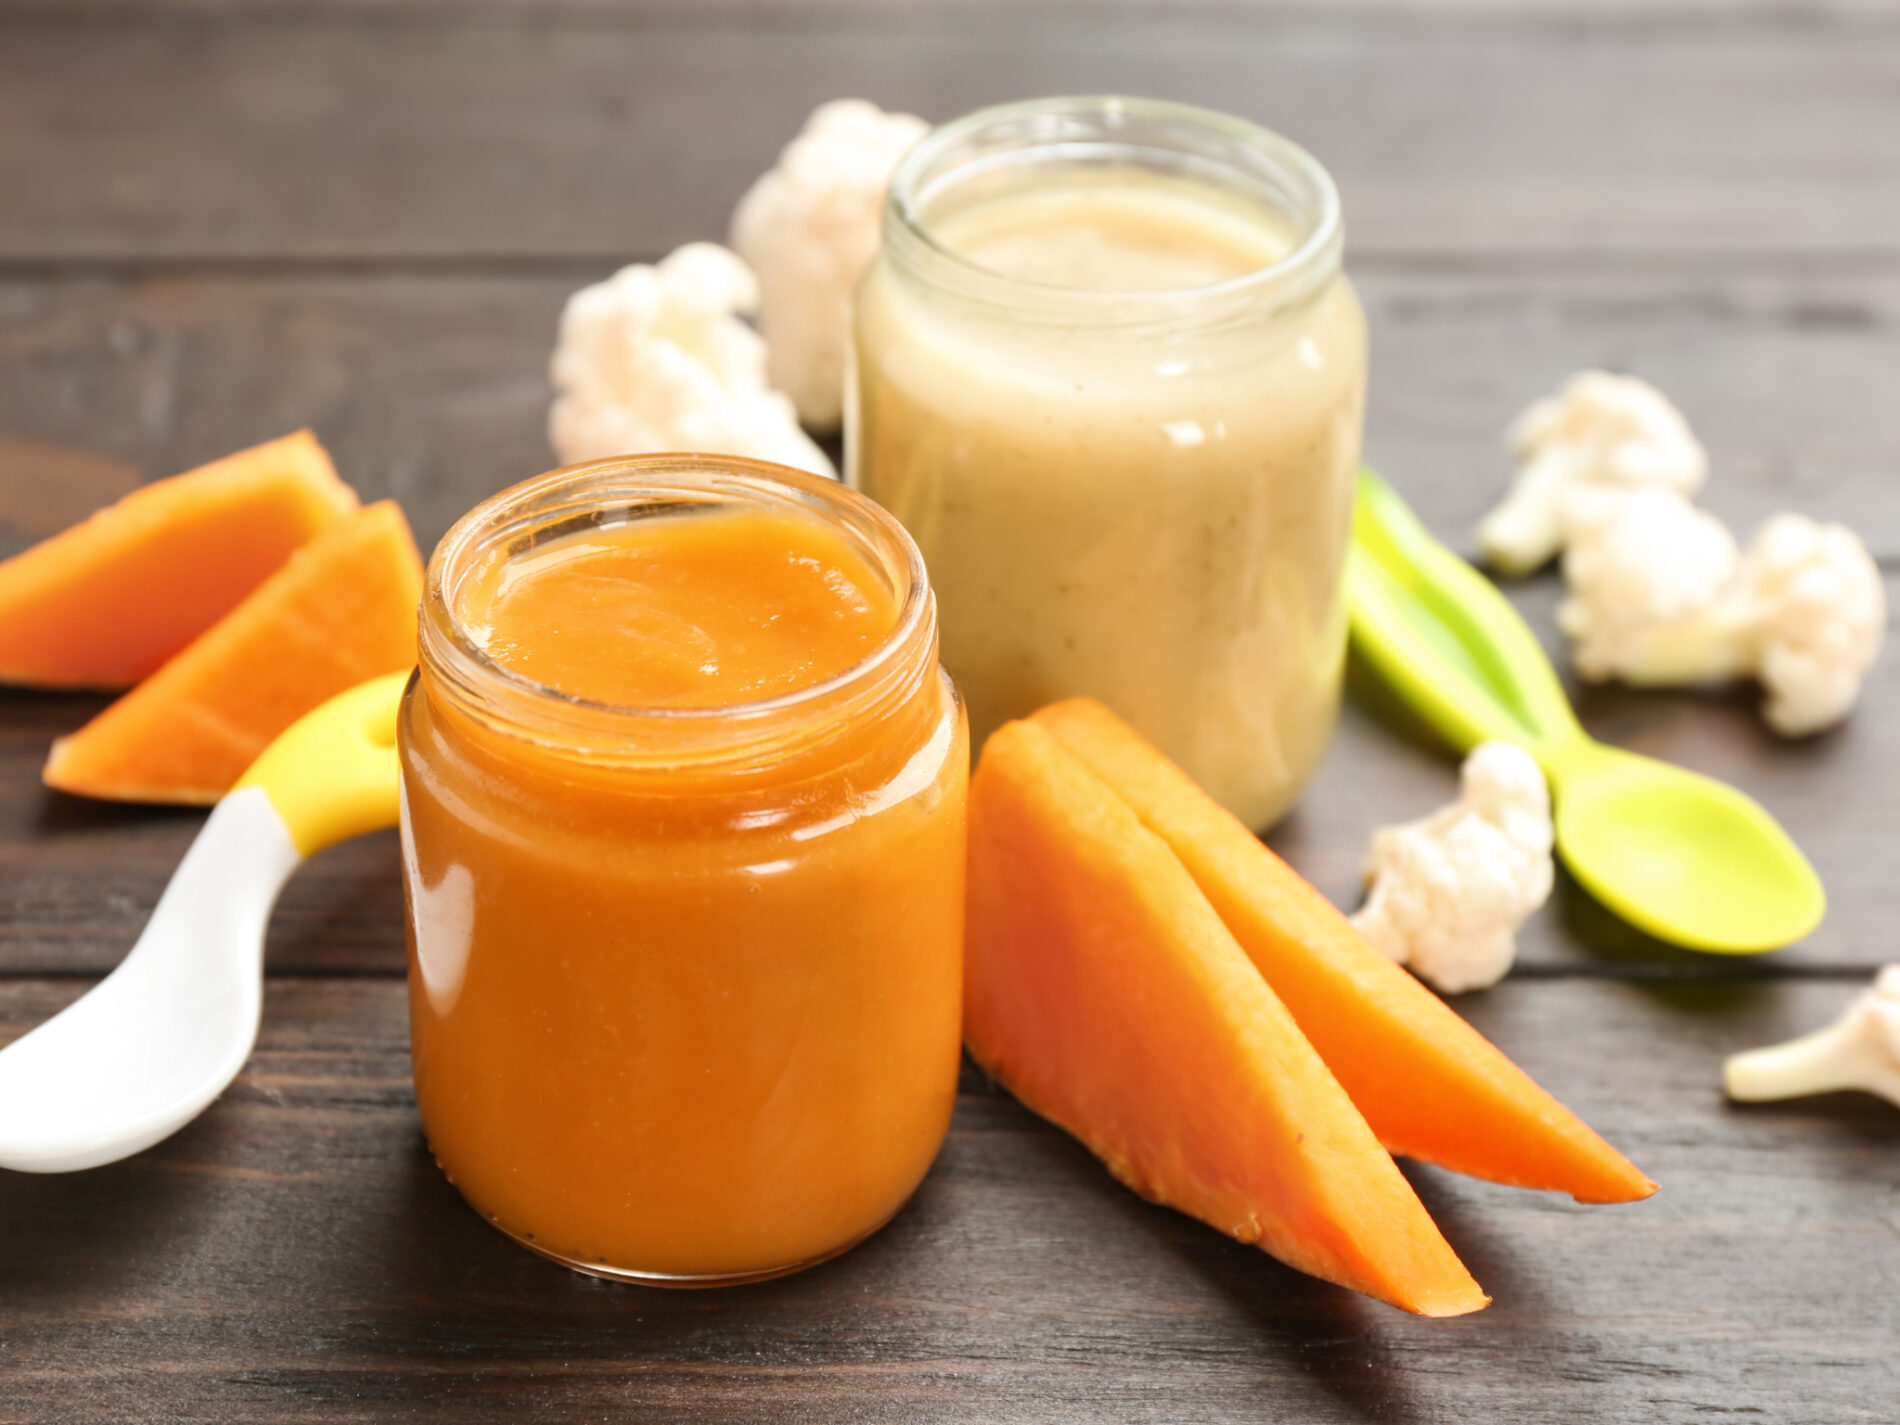 Orange and yellow baby food in jars